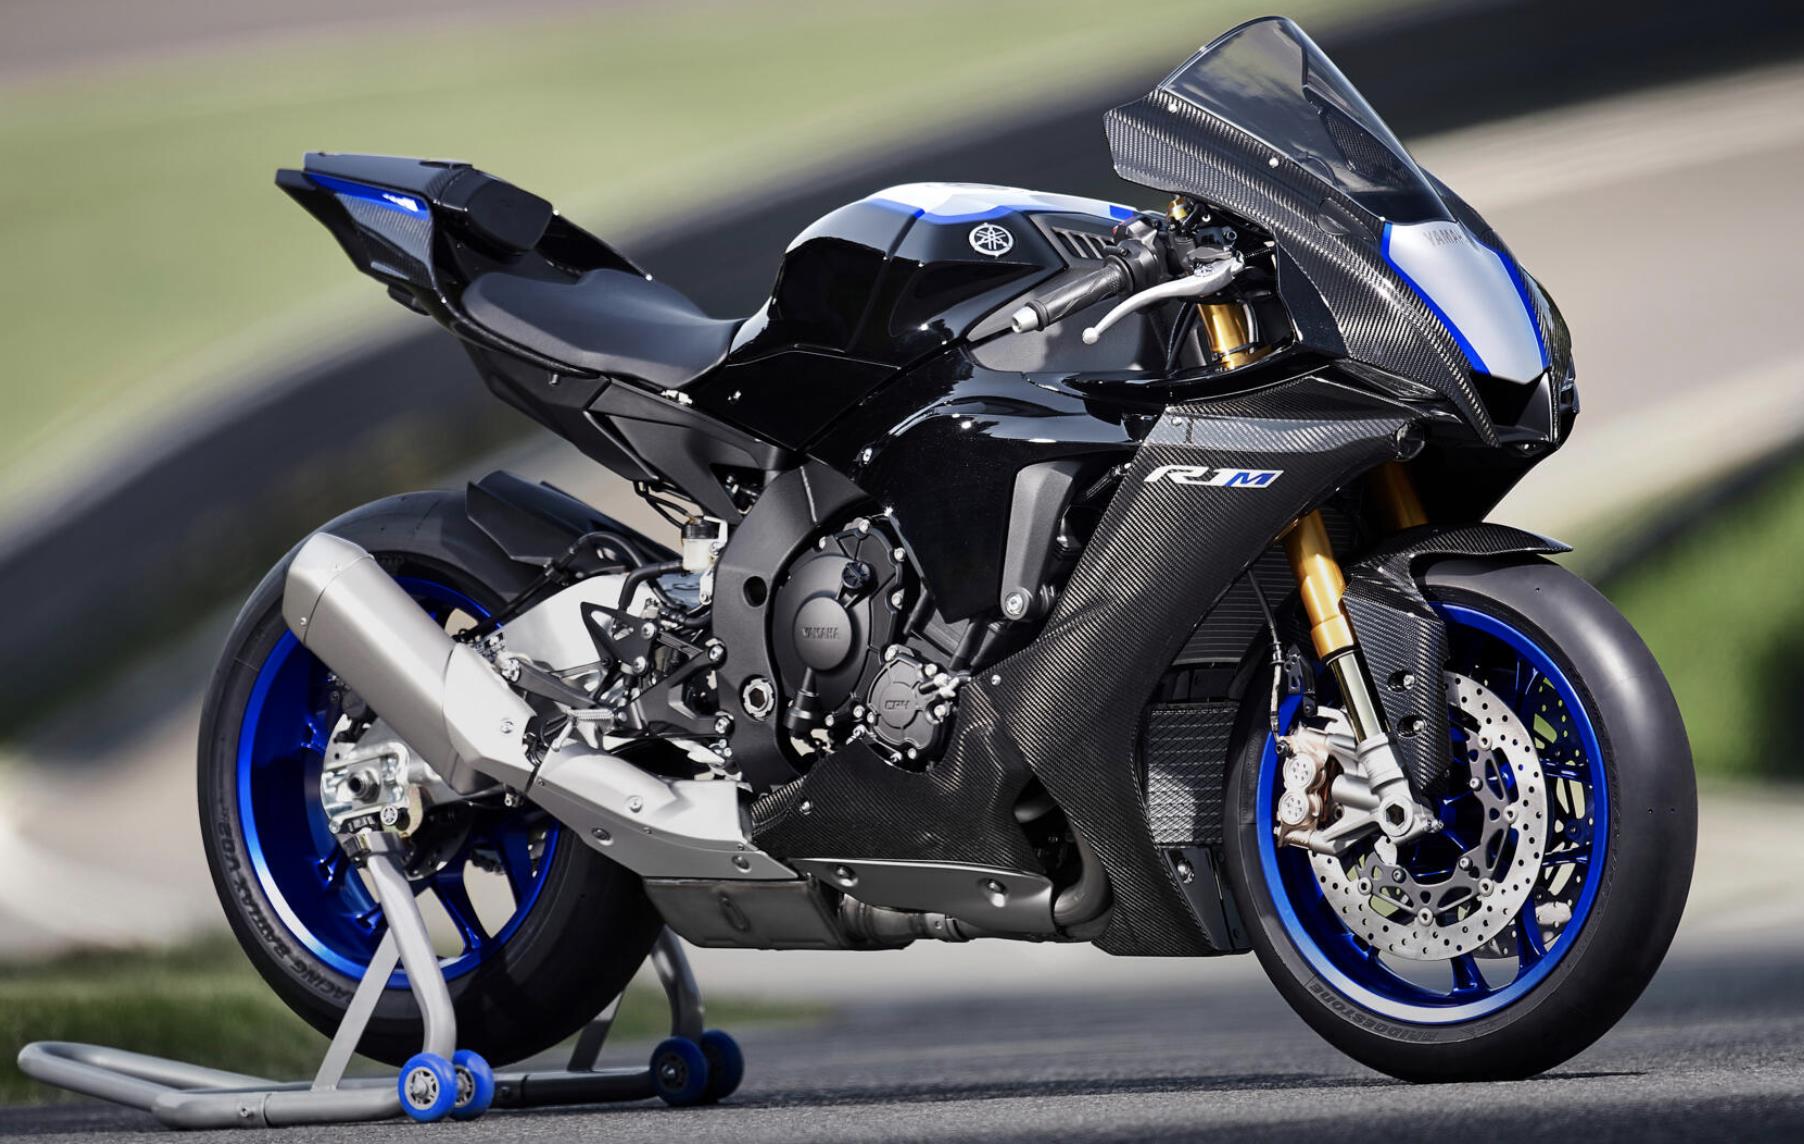 Yamaha YZF-R1M Specifications and Expected Price in India